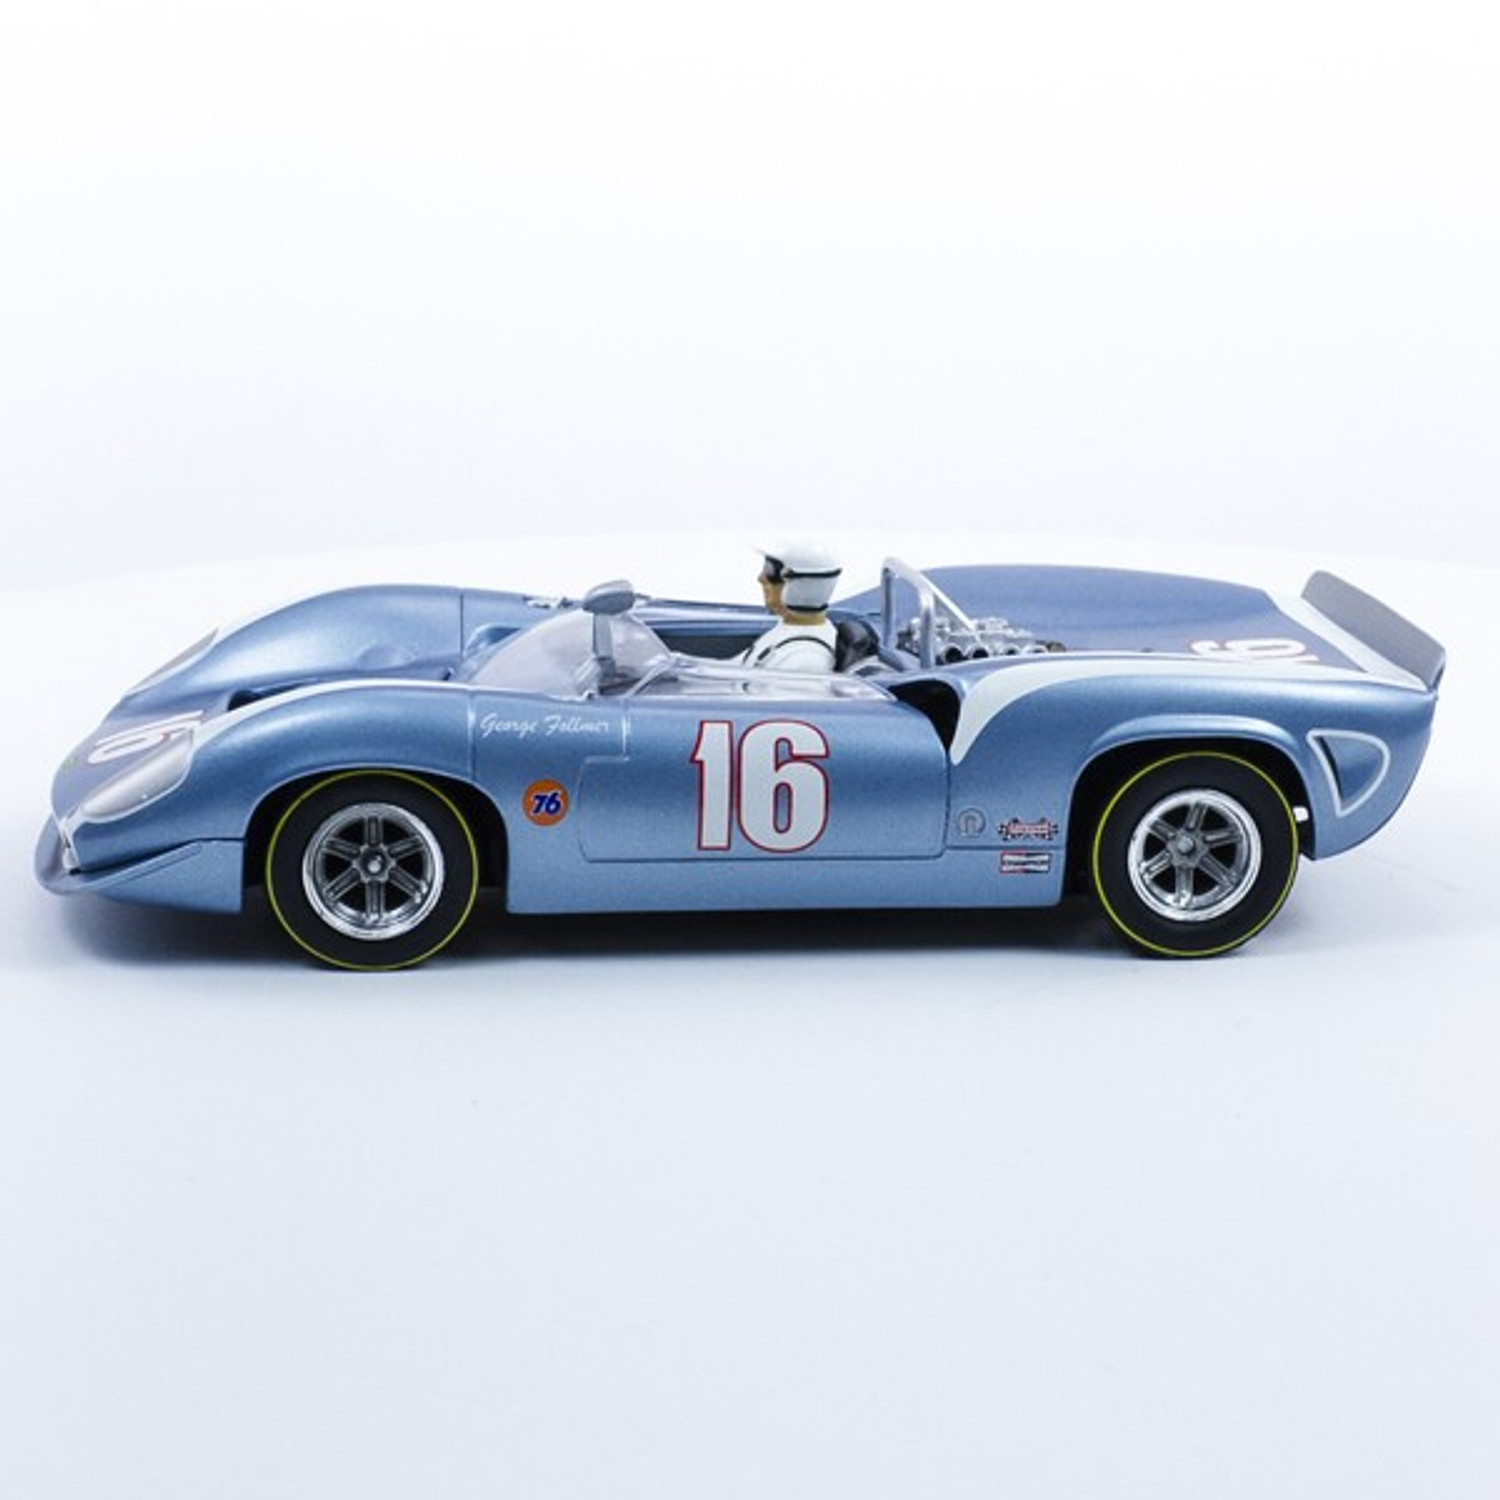 Stock Number: 16213 - Blue Open Top Number 16 Car by Unknown